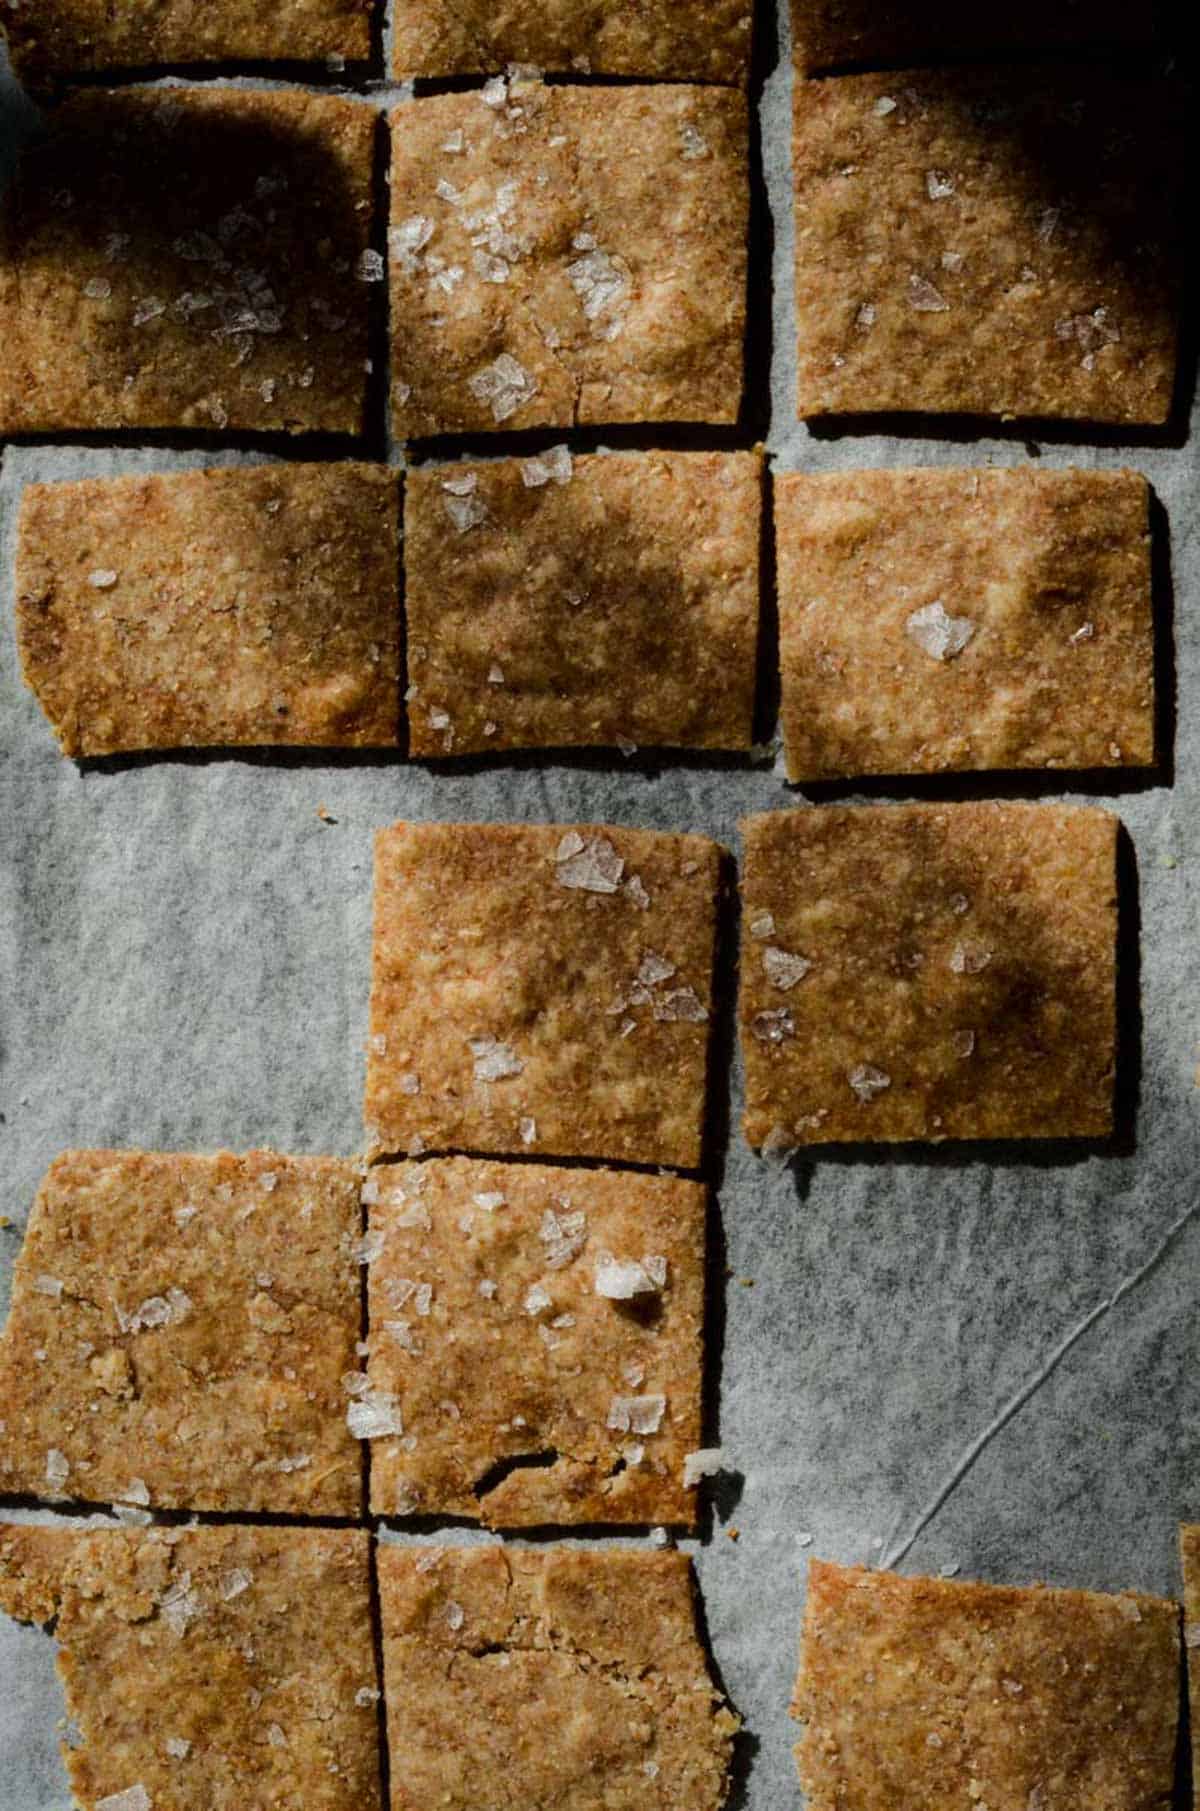 Crackers on baking pan cut into squares with sea salt on top.